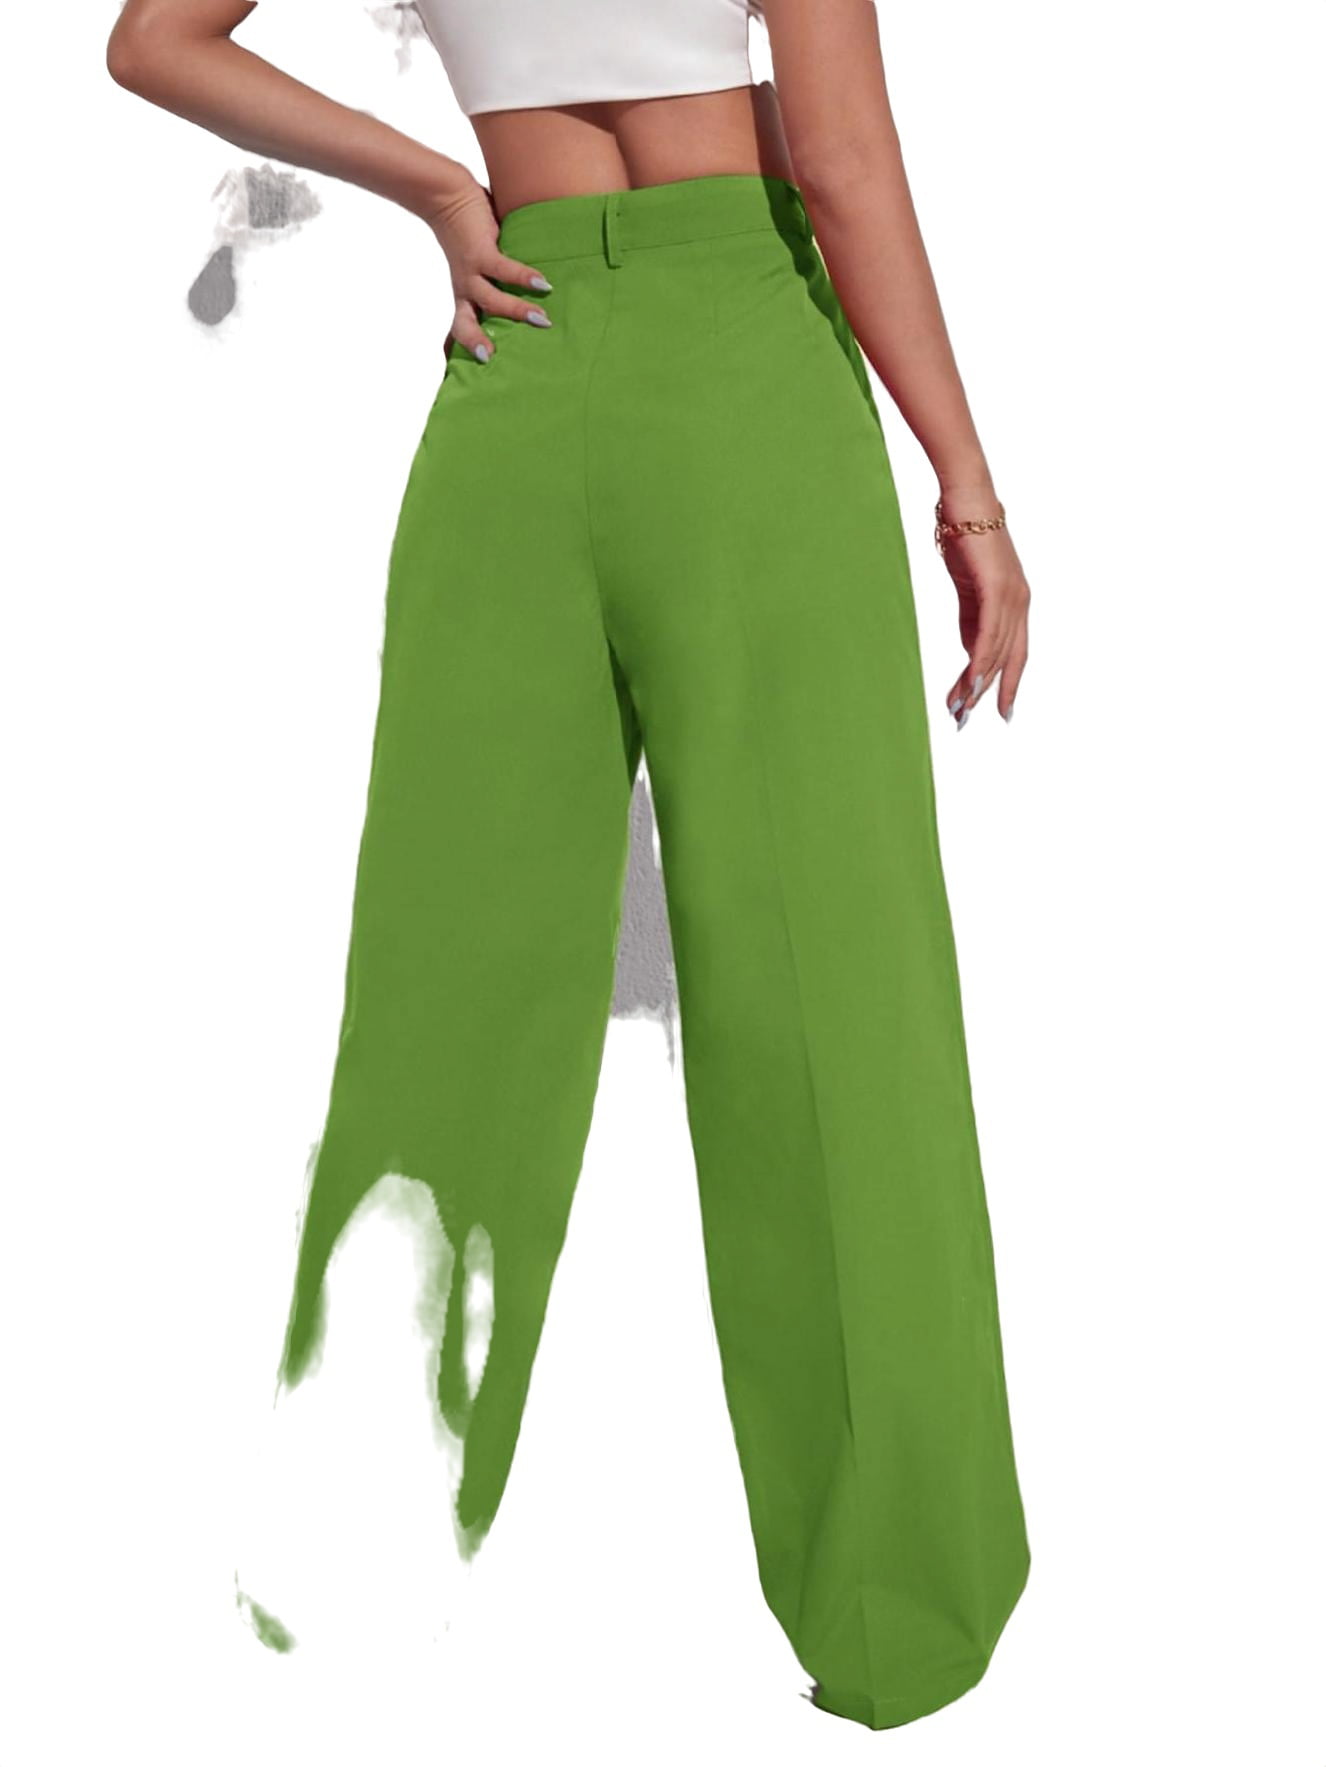 Wide leg satin pants in lime green - Himelhoch's Department Store